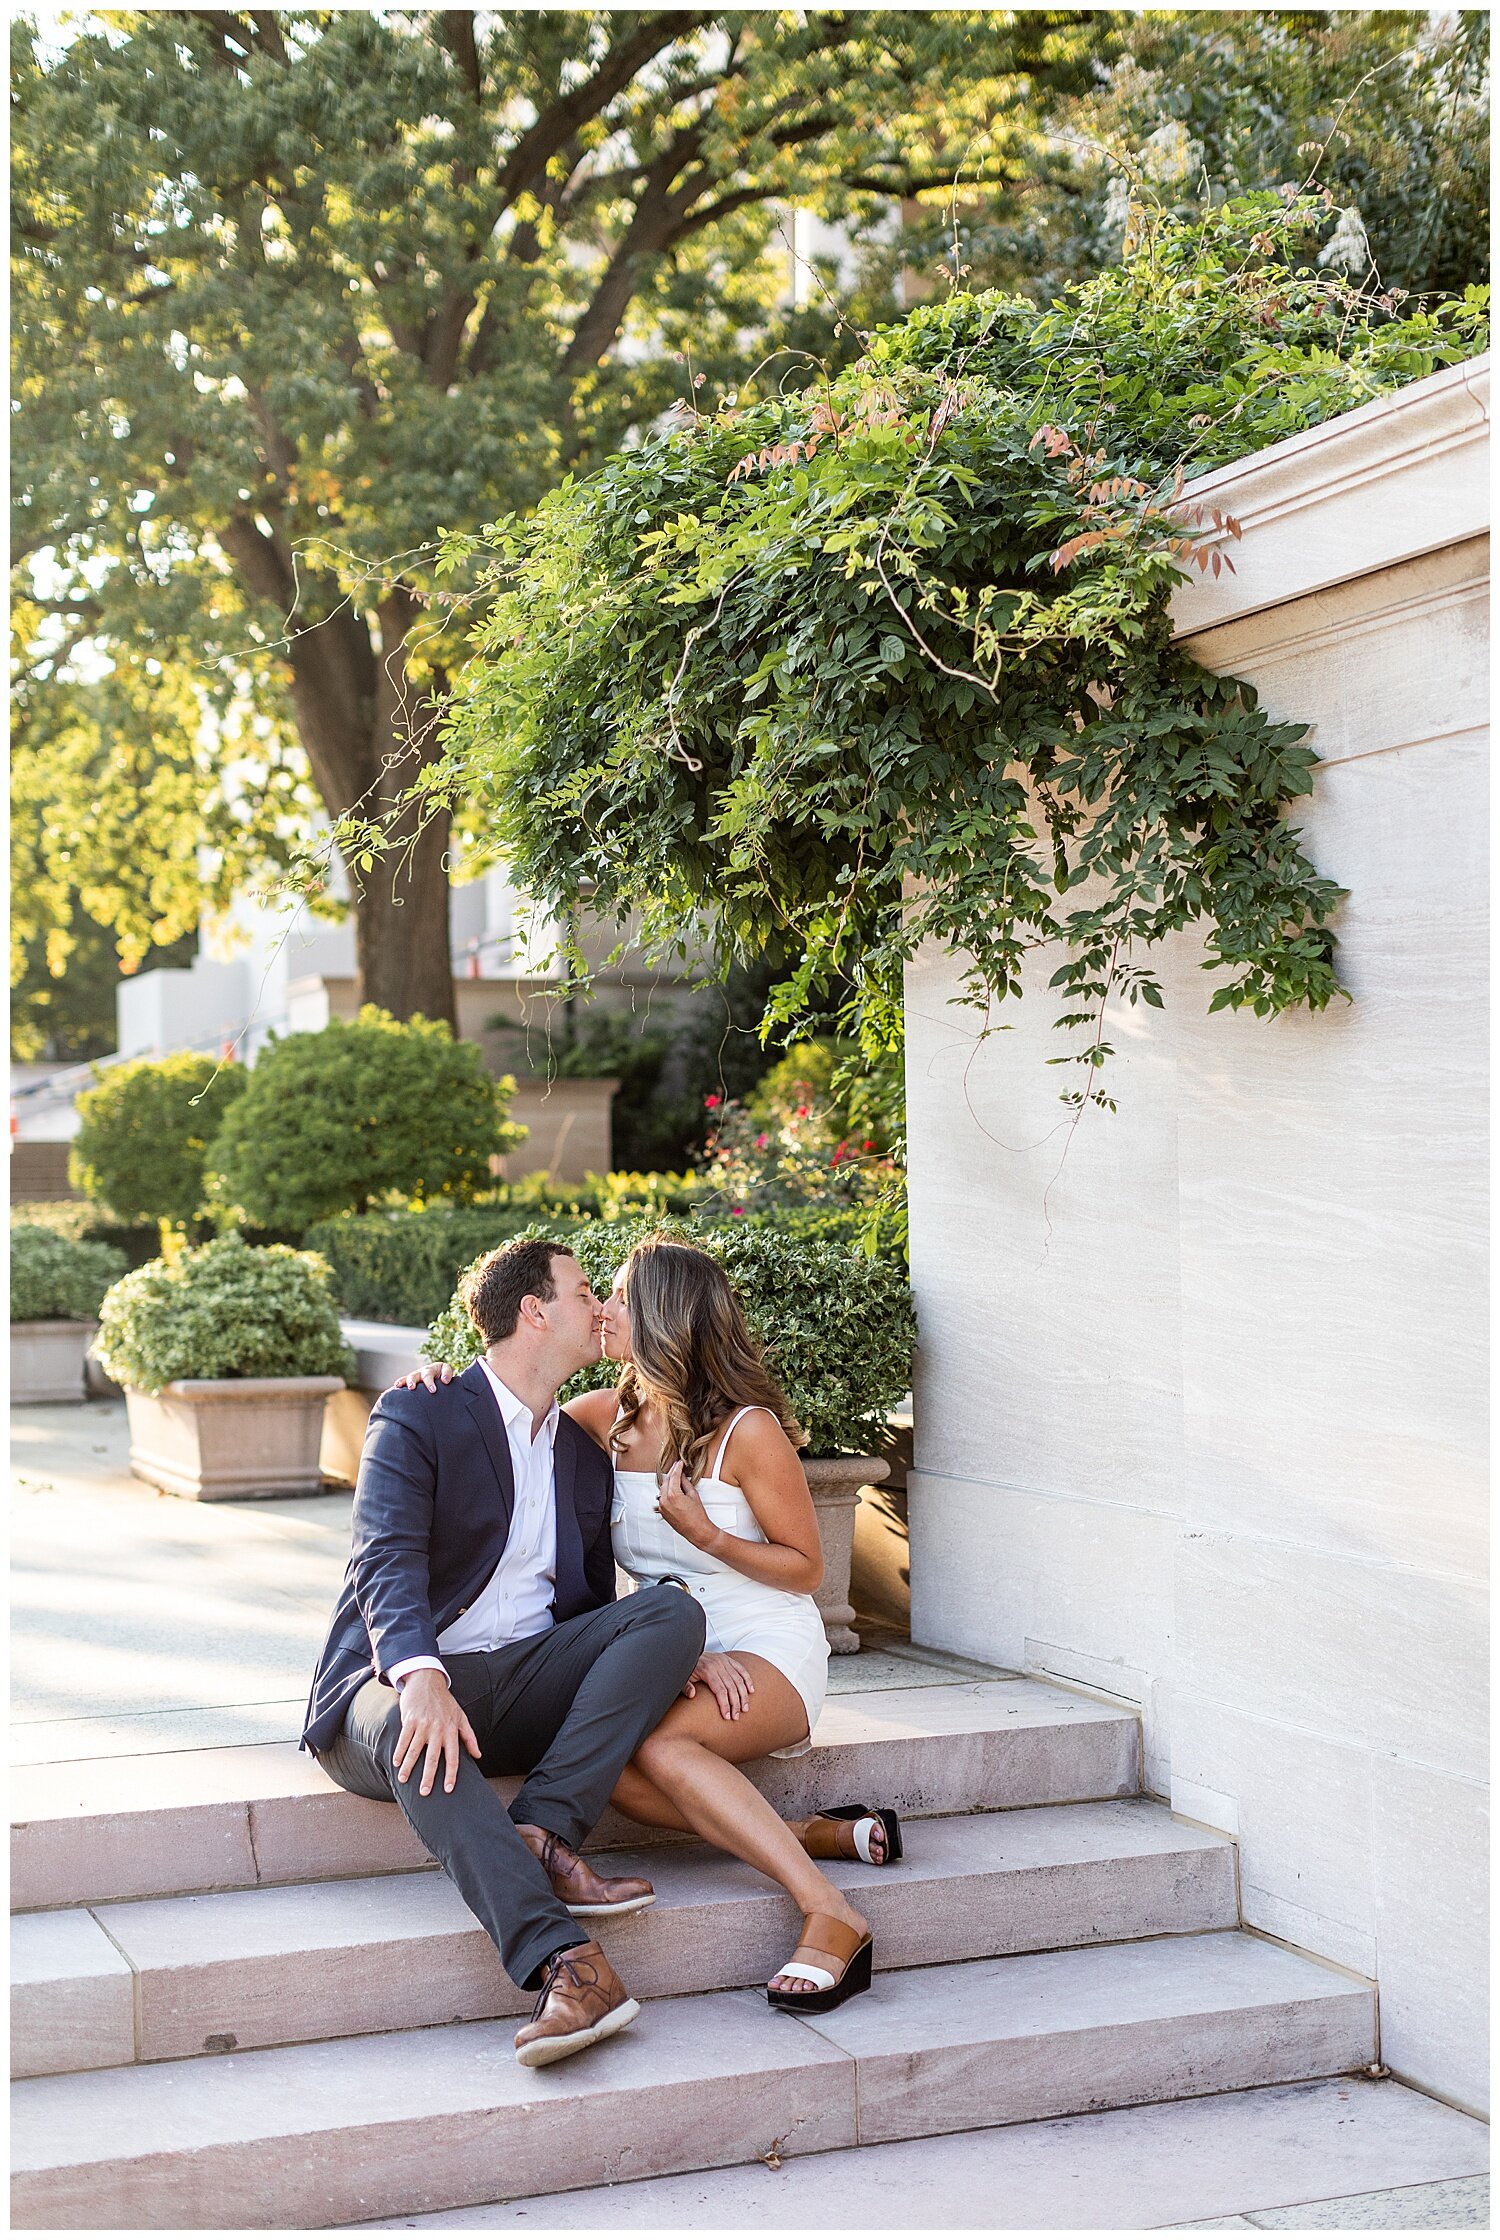 Haylie Chris National Mall Engagement Session 2020 Living Radiant Photography_0015.jpg